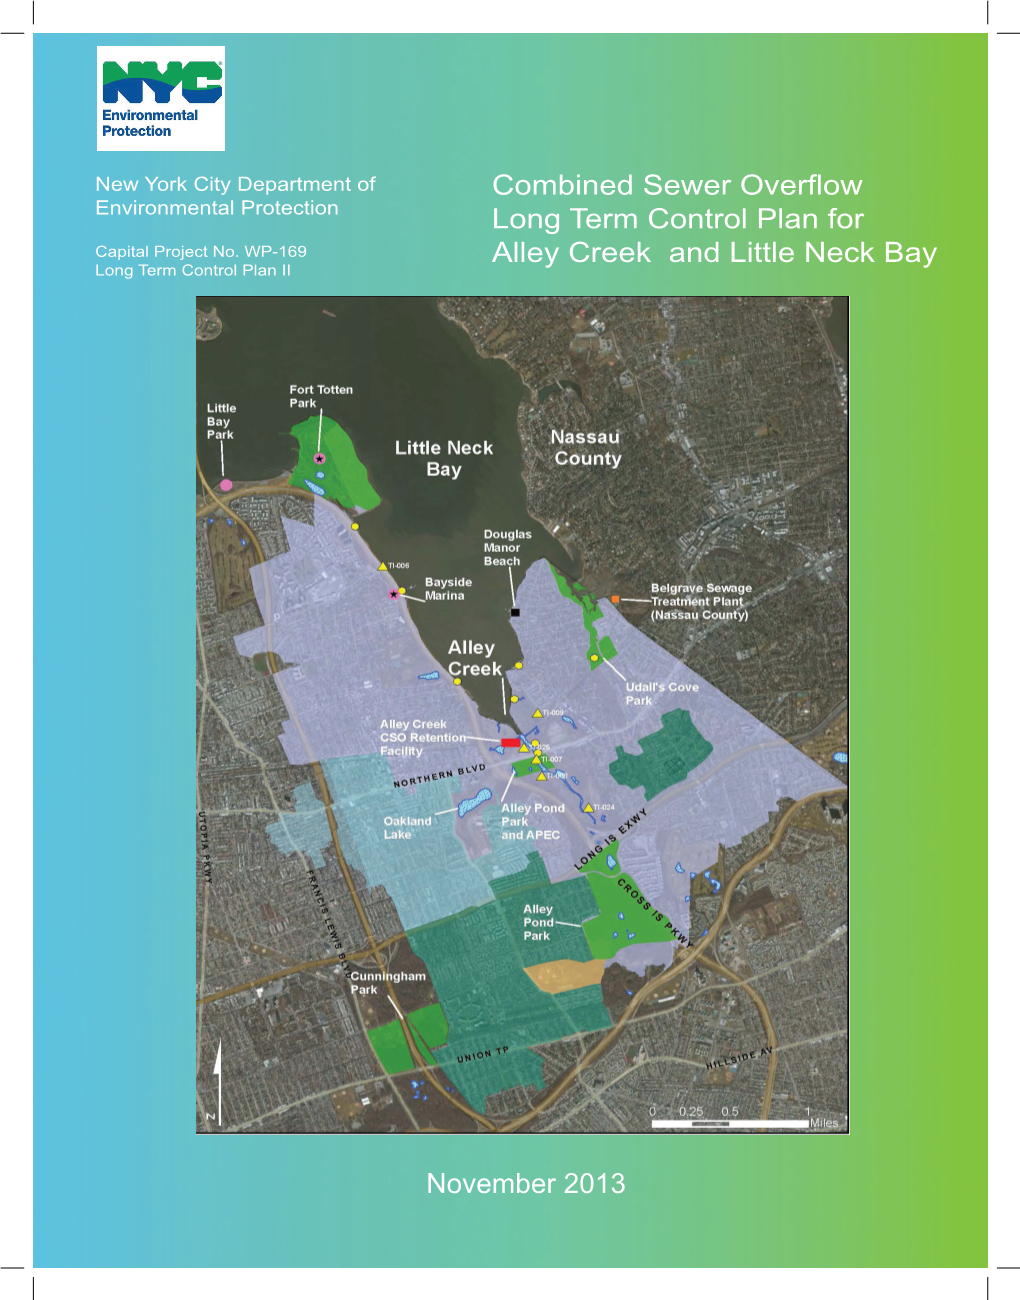 November 2013 Combined Sewer Overflow Long Term Control Plan for Alley Creek and Little Neck